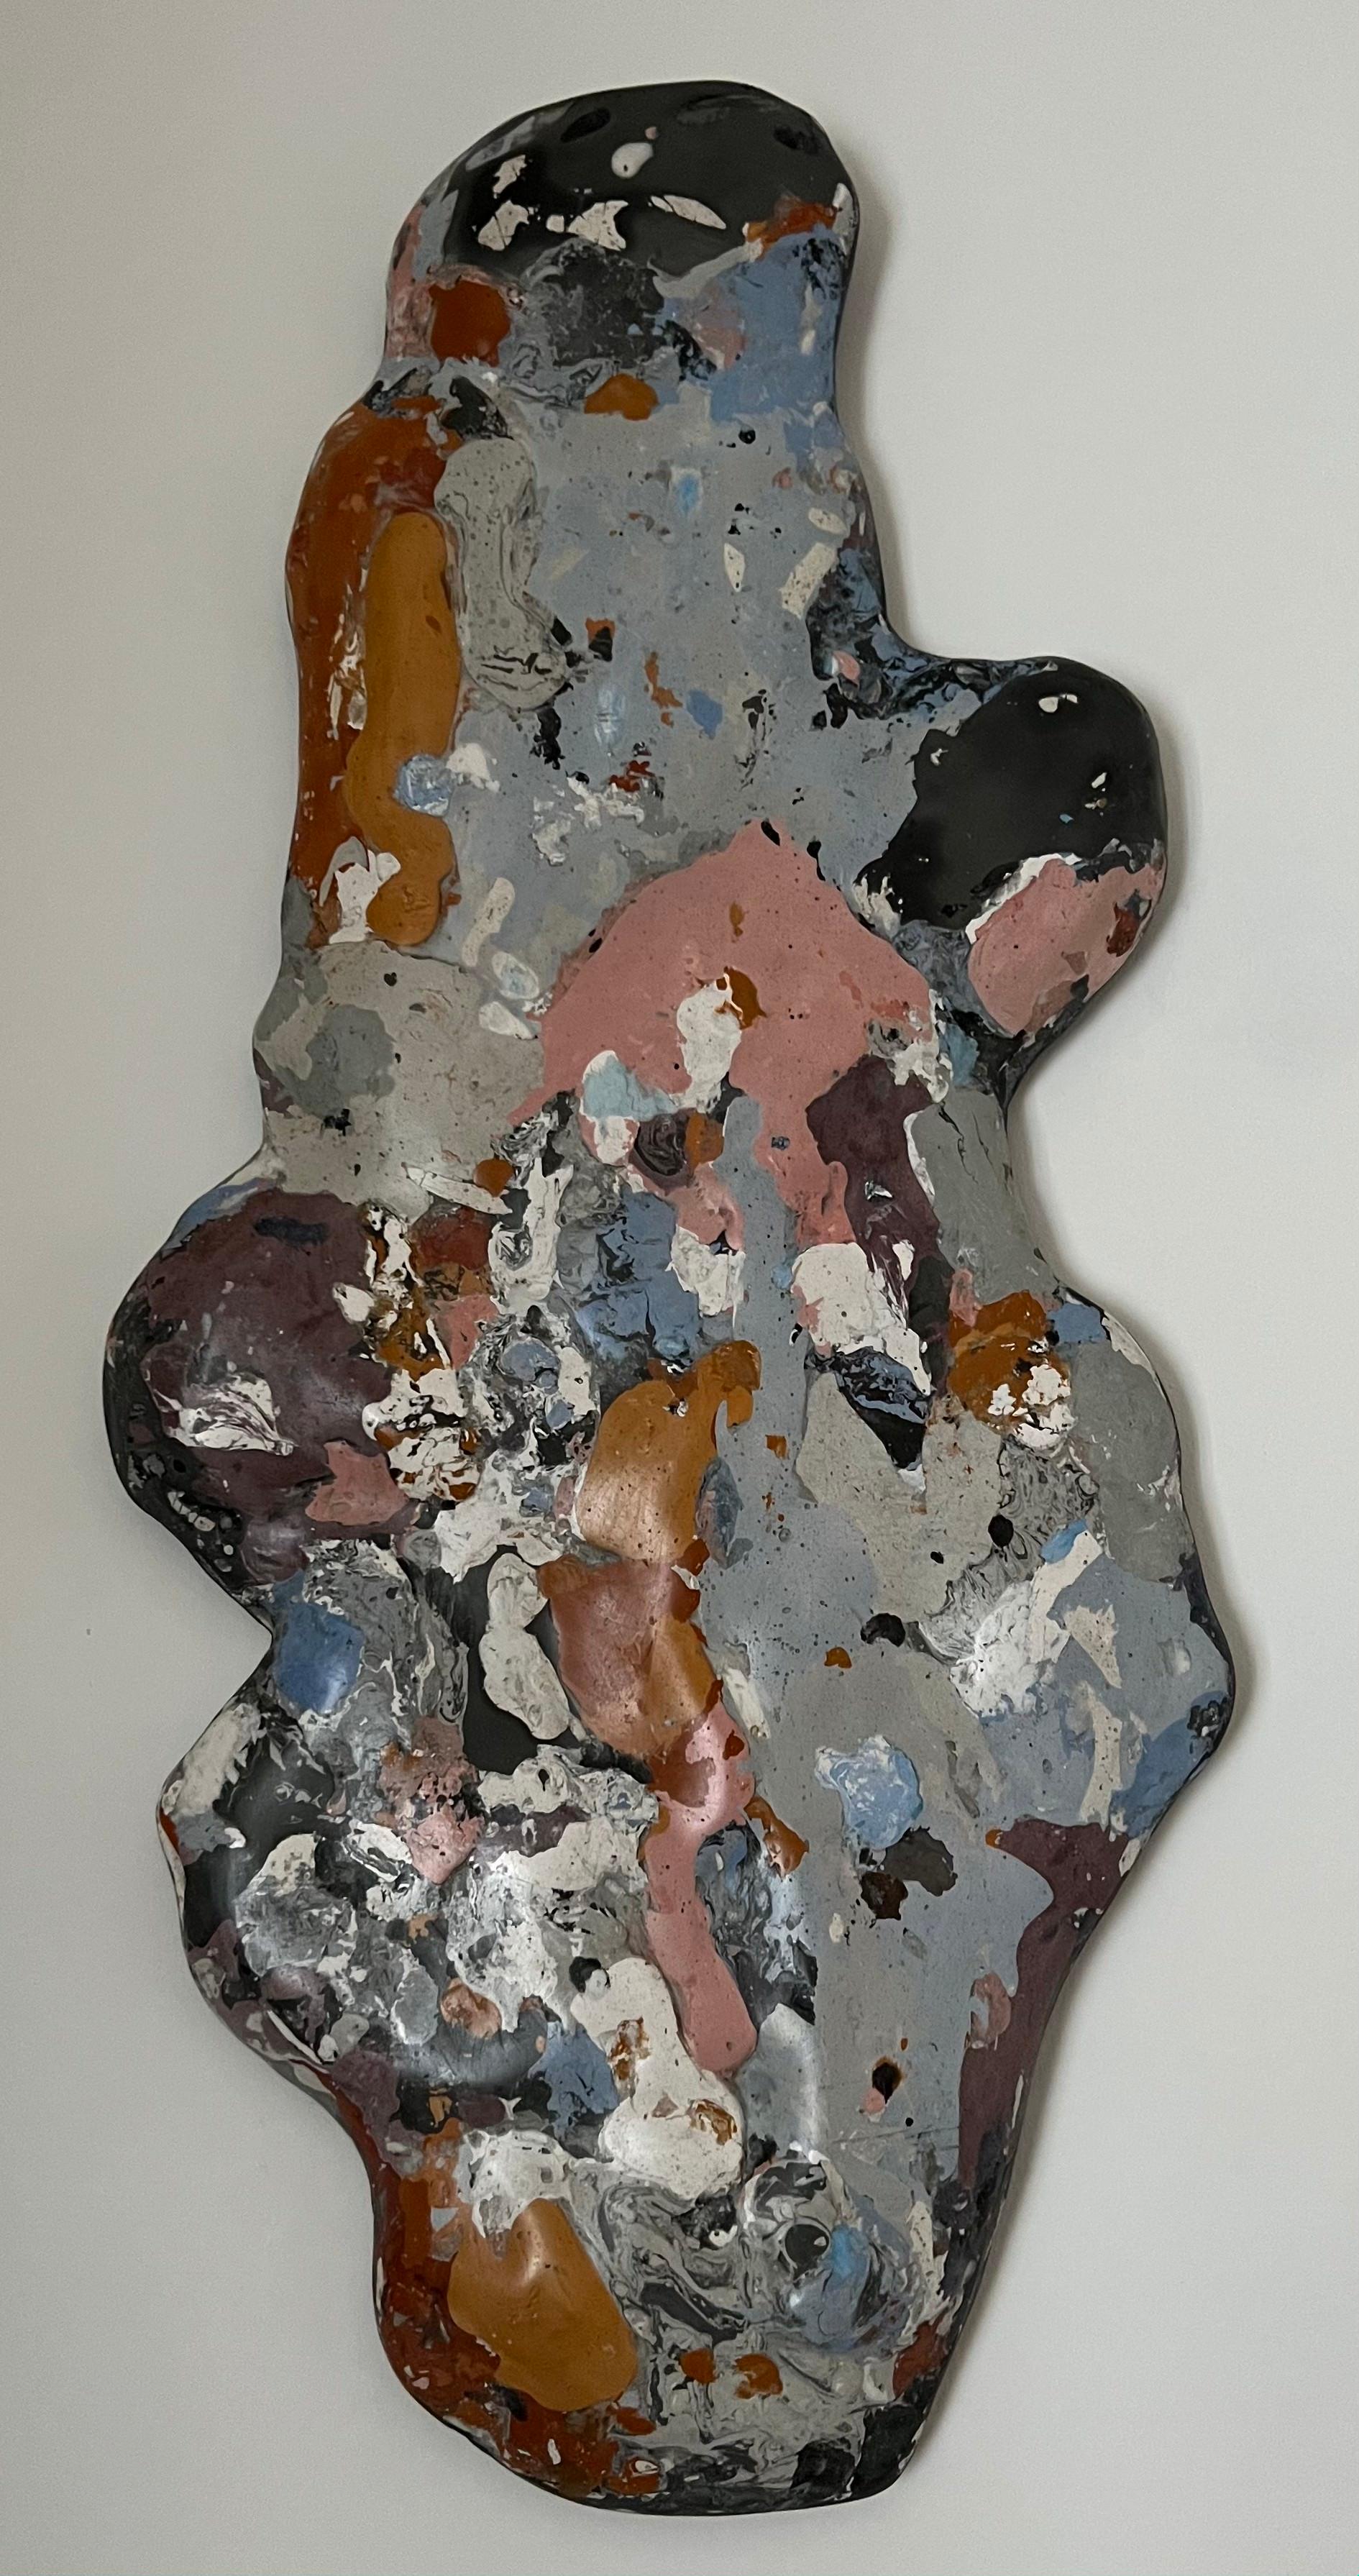 One of a kind multicolour wall art piece, hand crafted in stucco marmo. 
Due to the nature of the process, any shape, form or figure can unintentionally emerge from the organic mass. Thus the end result makes for an intriguing and entertaining